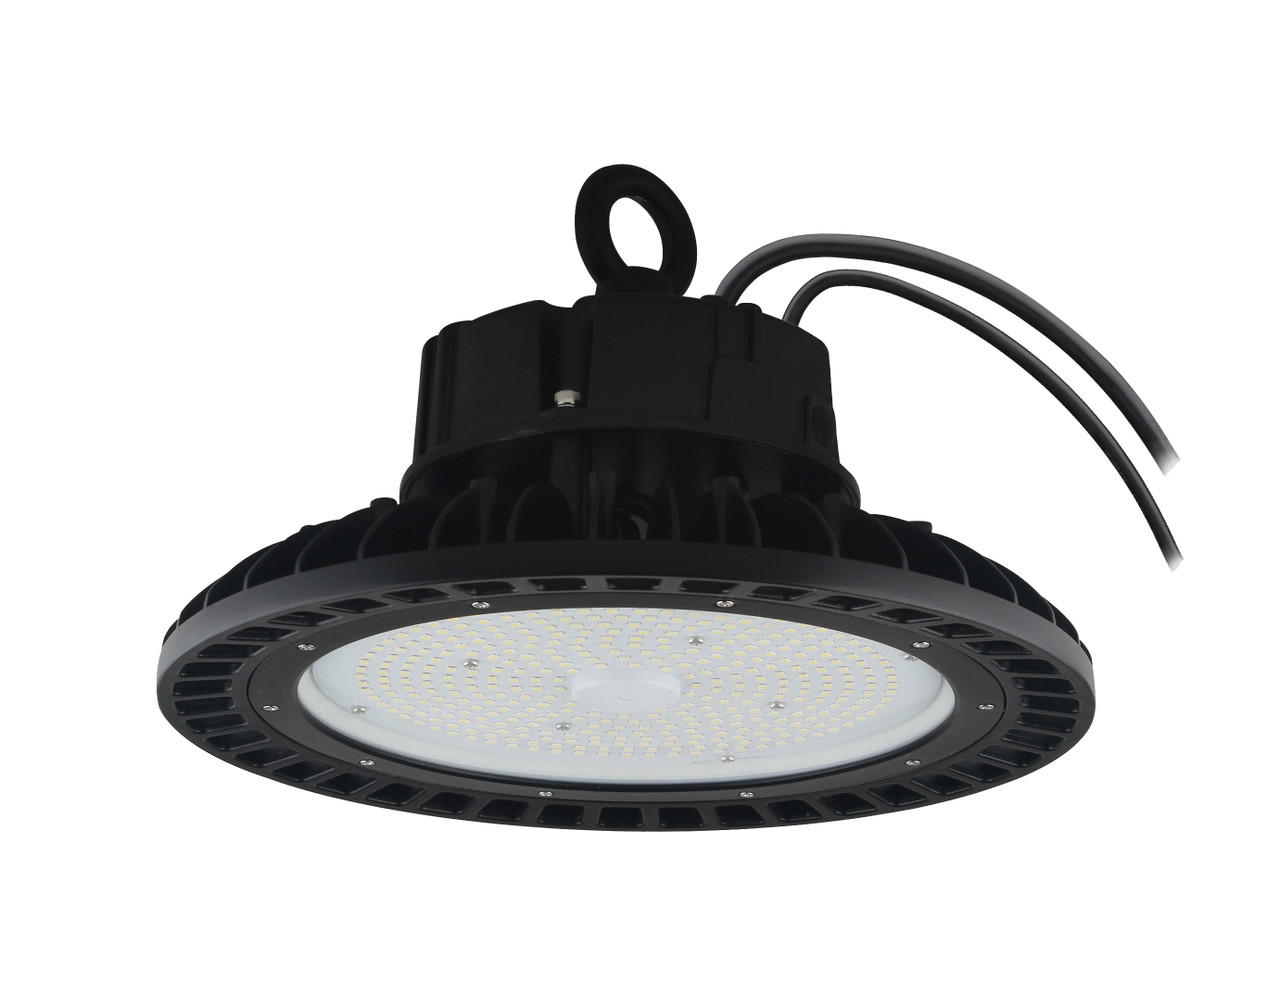 ▪Available in 4000k (neutral white) and 5000k (cool white) color temperatures.
▪Long life LEDs provide 174,000 hours of operation with at least 70% of initial lumen output (L70).
▪Provides a range of 14,000 to 34,000 nominal lumens.
▪Universal 120-277 AC voltage (50-60Hz) and 6-foot incoming AC power cords are standard.
▪0-10vdc dimming drivers are standard.
▪Watertight, compression-type electrical connectors.
▪Mounting options include suspension from pre-installed mounting hook, yoke mounting, snap hook, and attachment to electrical conduit.
▪Glass lens.
▪Power factor > 0.90.
▪Total harmonic distortion < 20%.
▪Color rendering index > 80.
▪Die cast aluminum housing, painted black.
▪Easy installation in new construction or retrofit.